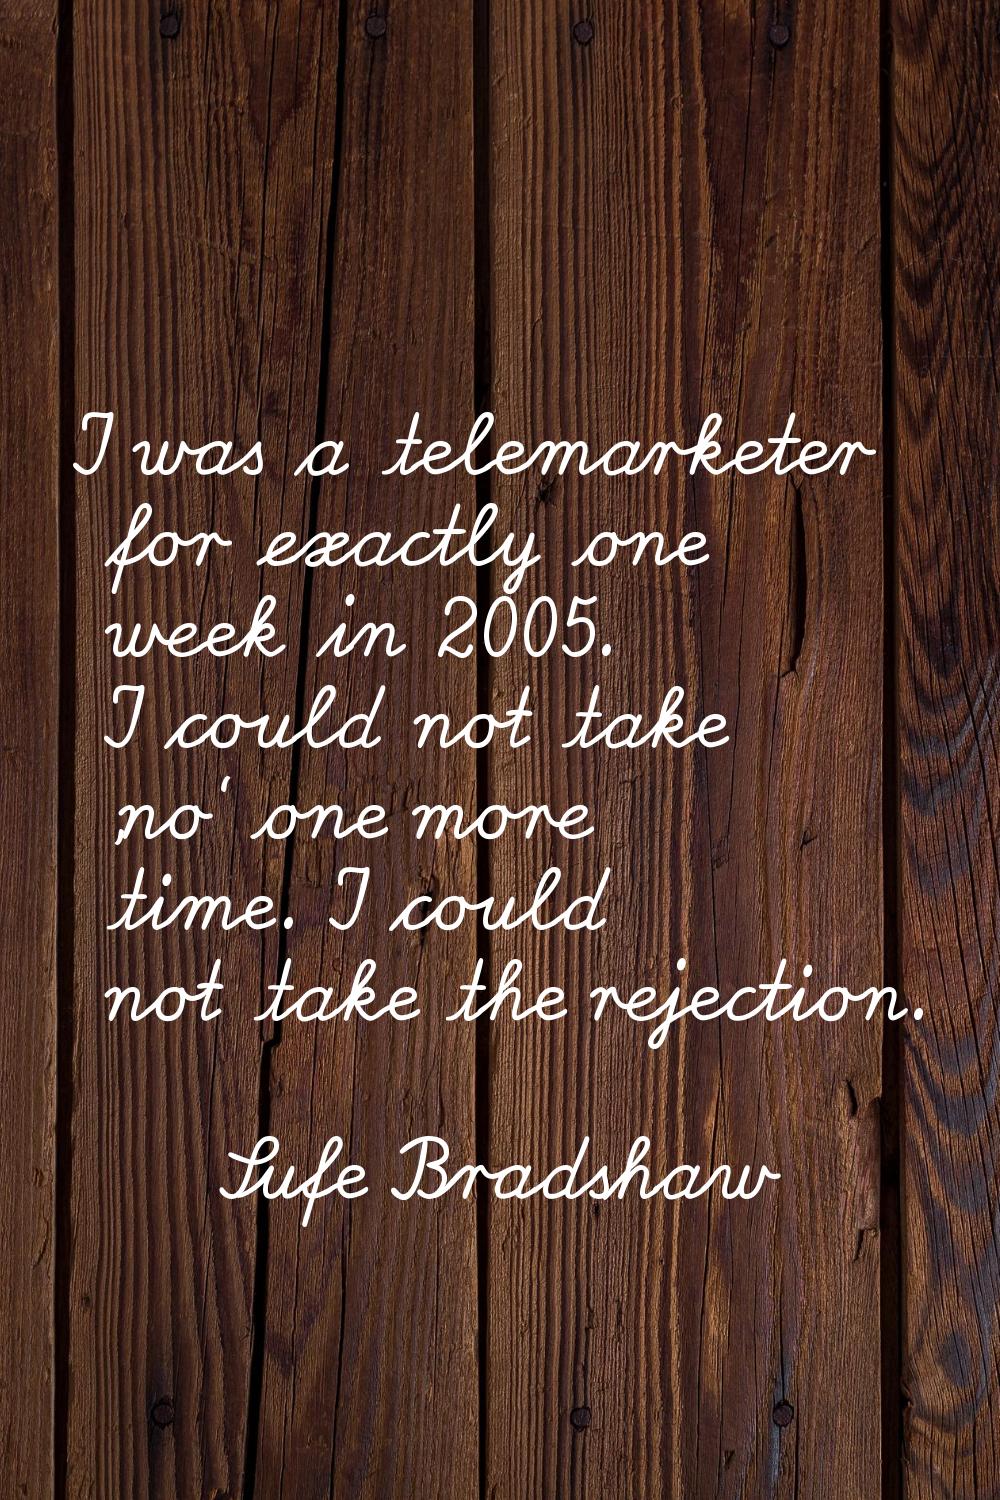 I was a telemarketer for exactly one week in 2005. I could not take 'no' one more time. I could not